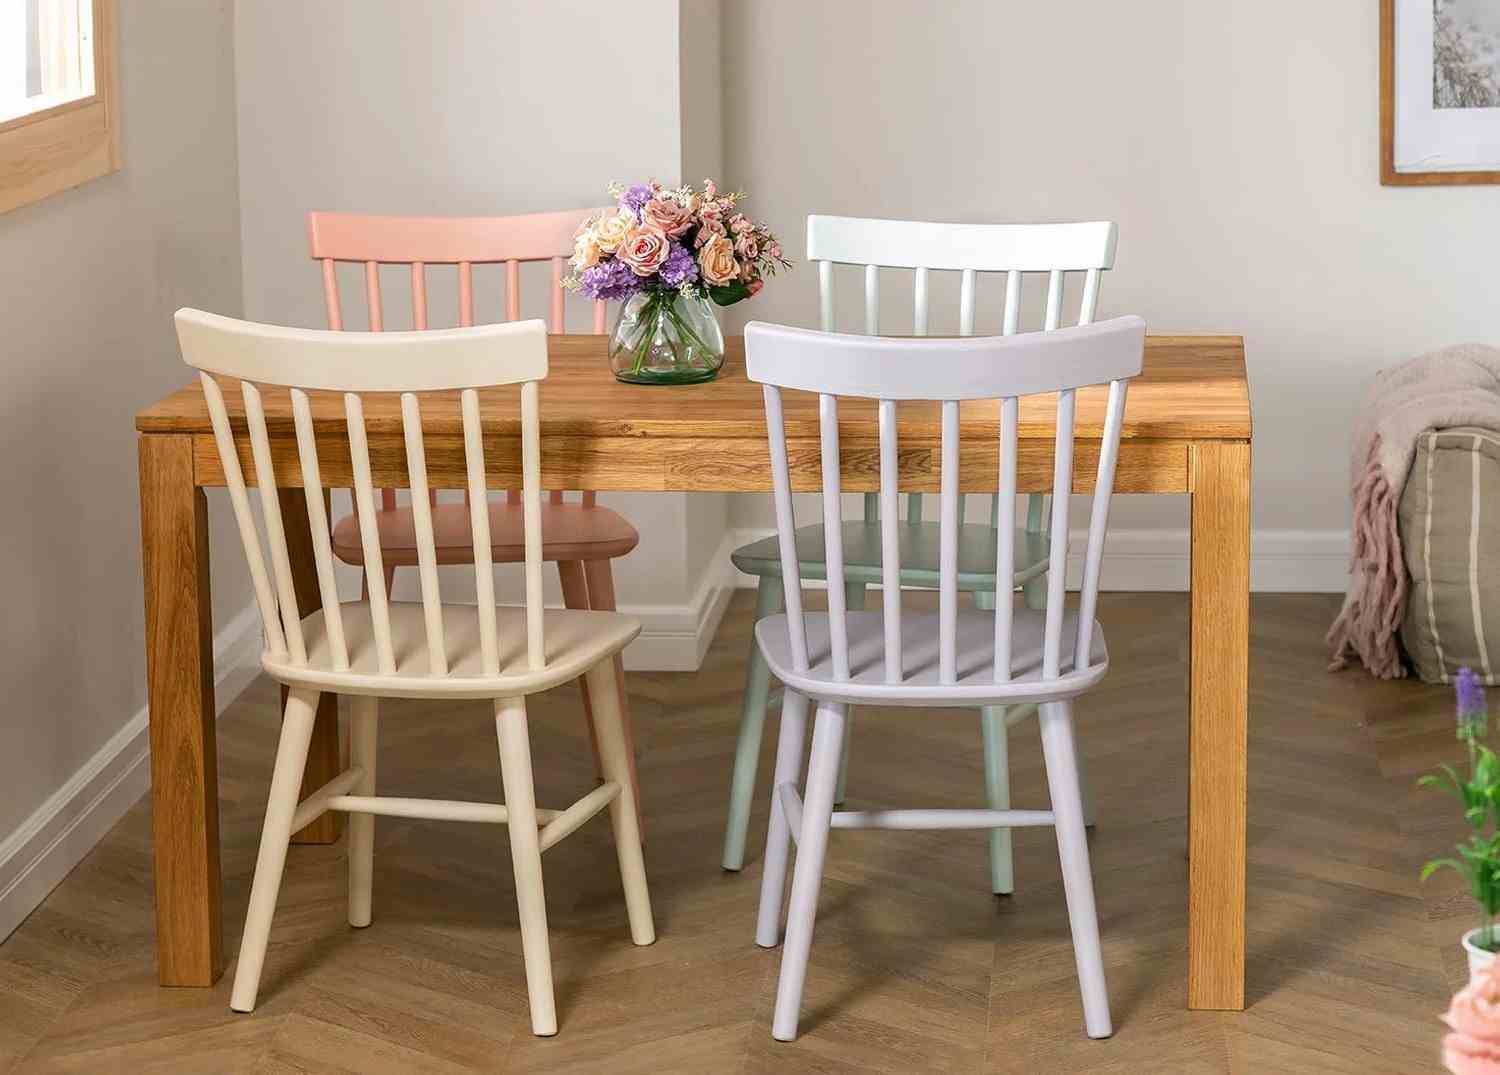   Painting Pastel Chairs 